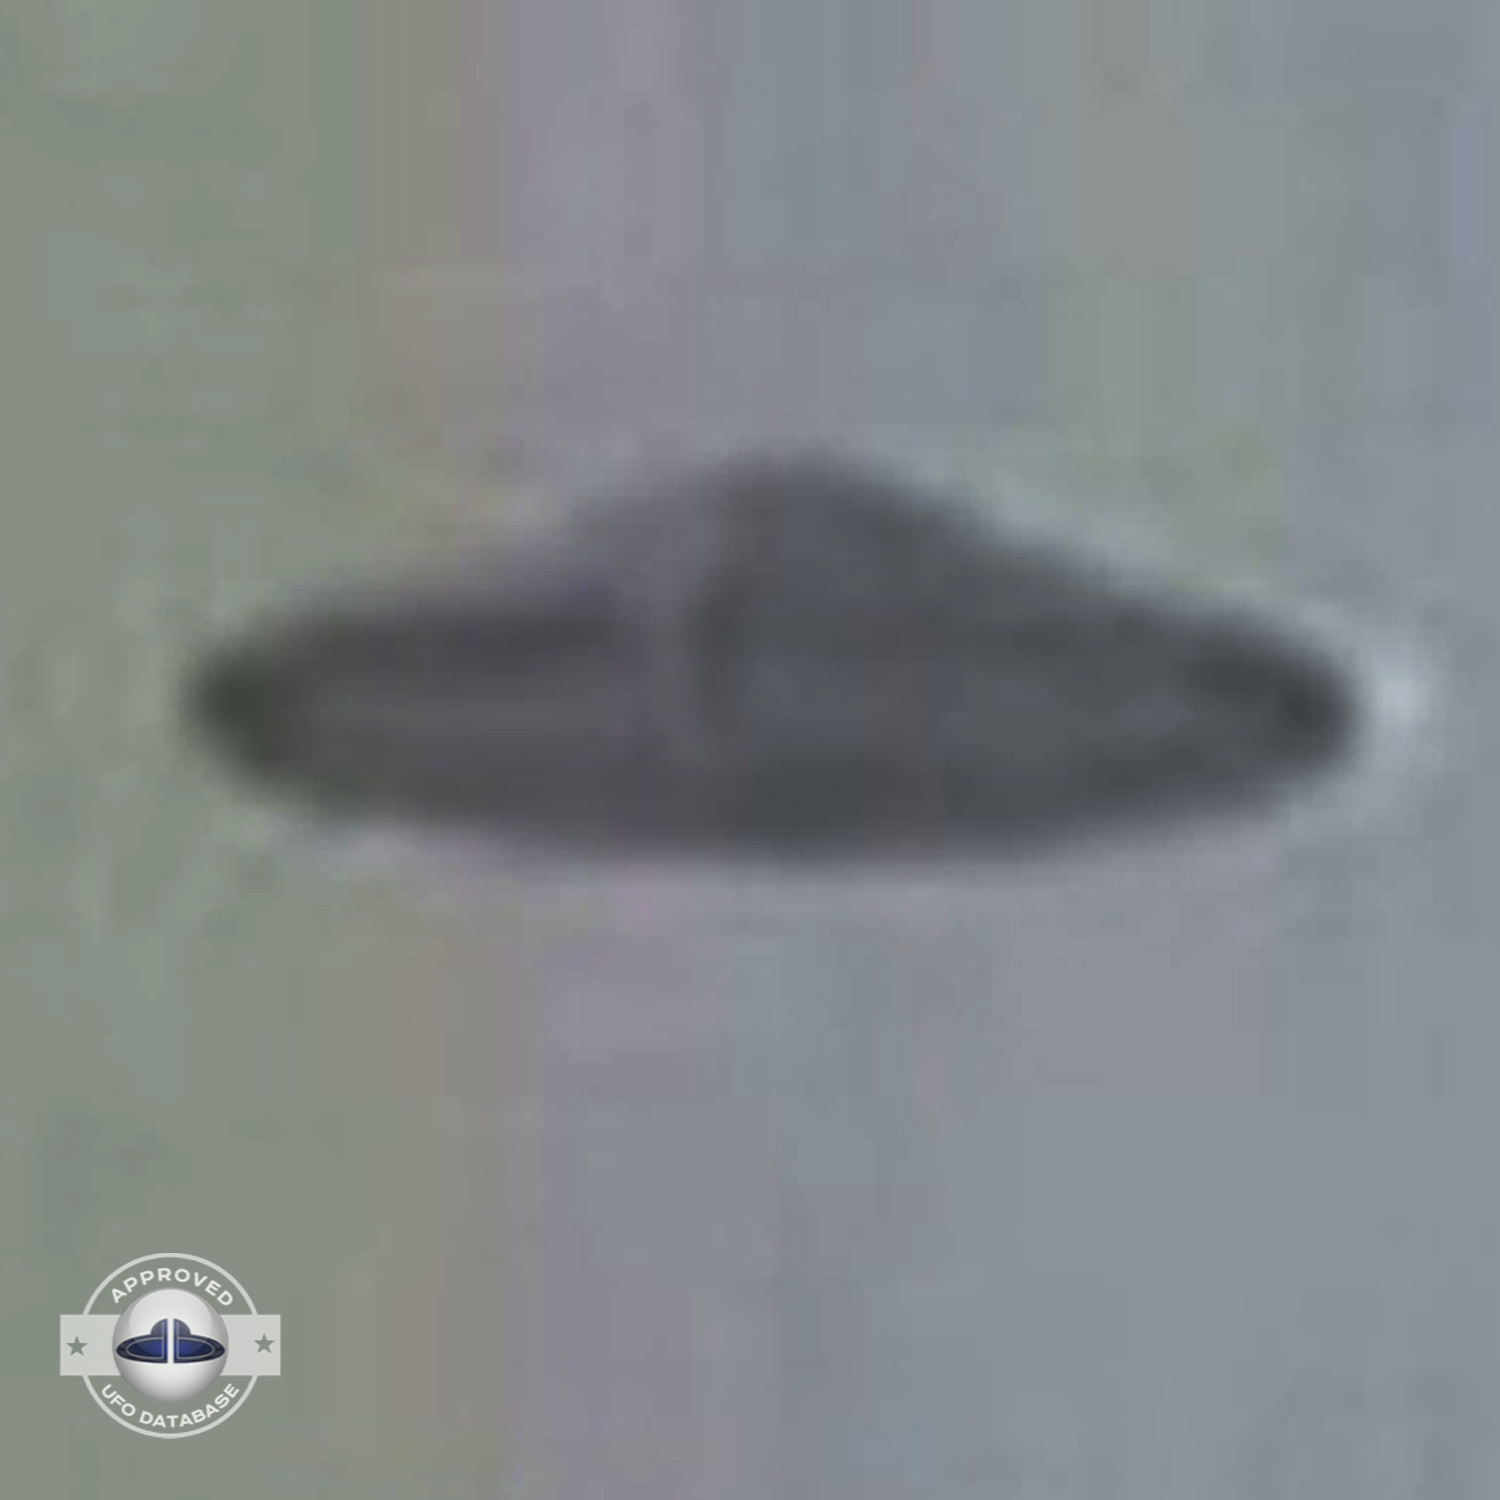 Mexico city August 6 1997 UFO Pictures from famous video (UFOdB.com) UFO Picture #55-6